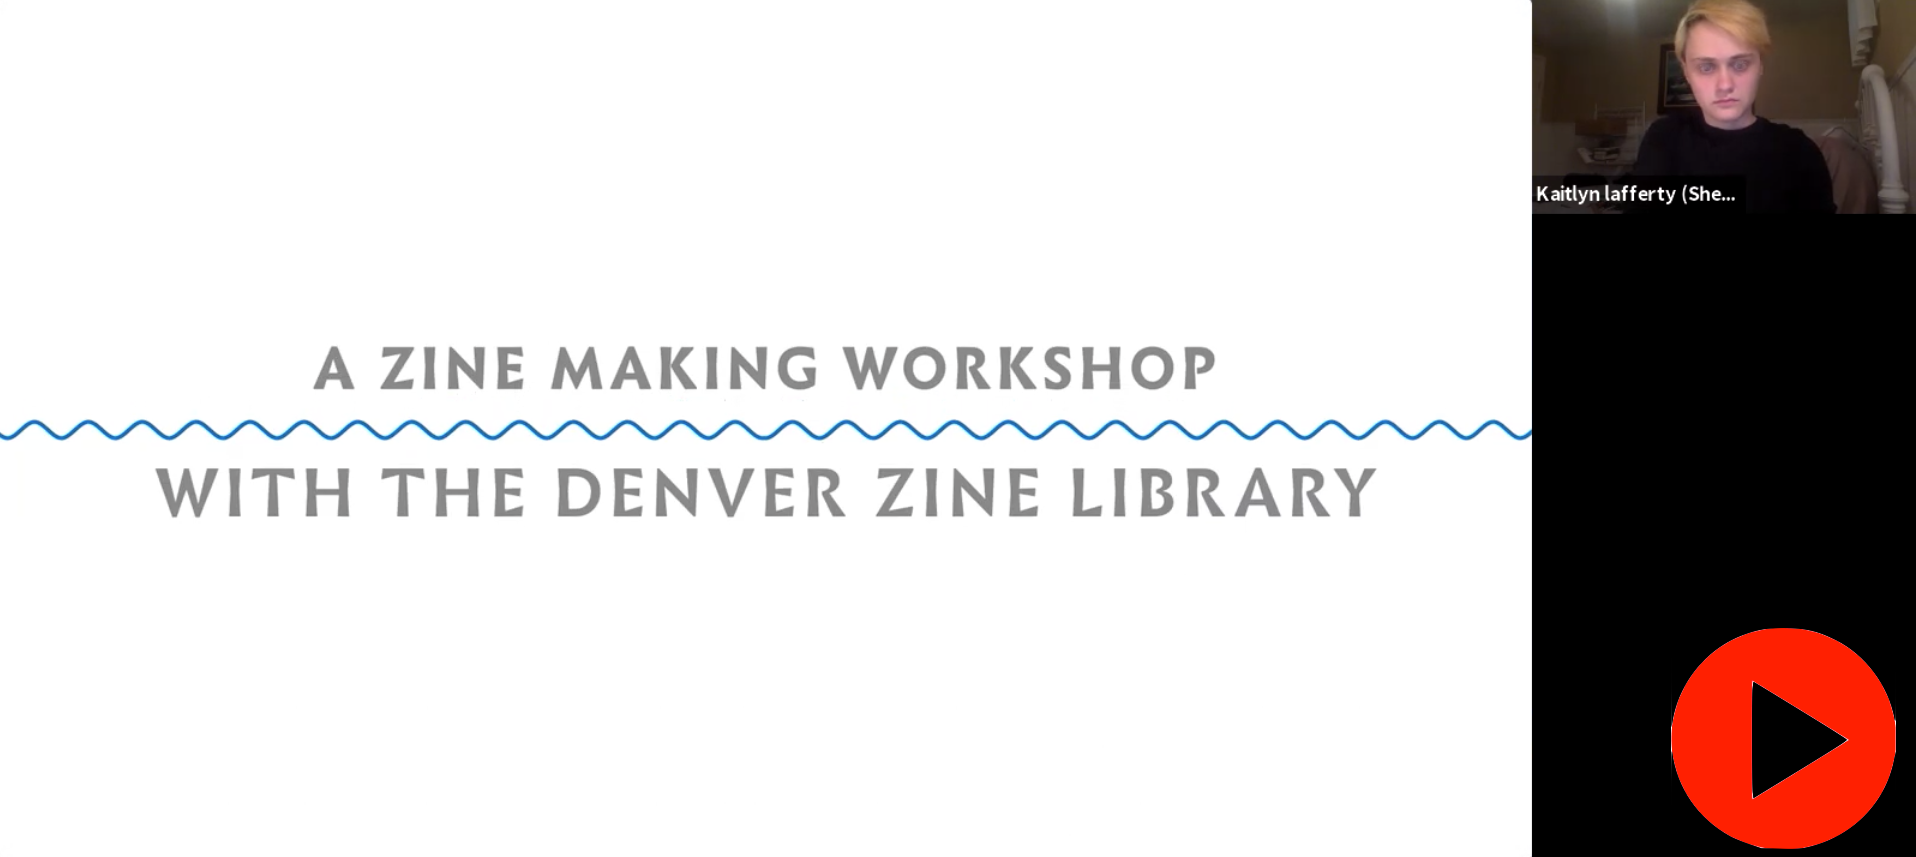 A screenshot reading “A ZINE MAKING WORKSHOP WITH THE DENVER ZINE LIBRARY” To the right is Kaitlyn Lafferty in a black sweatshirt and a short blonde haircut. 